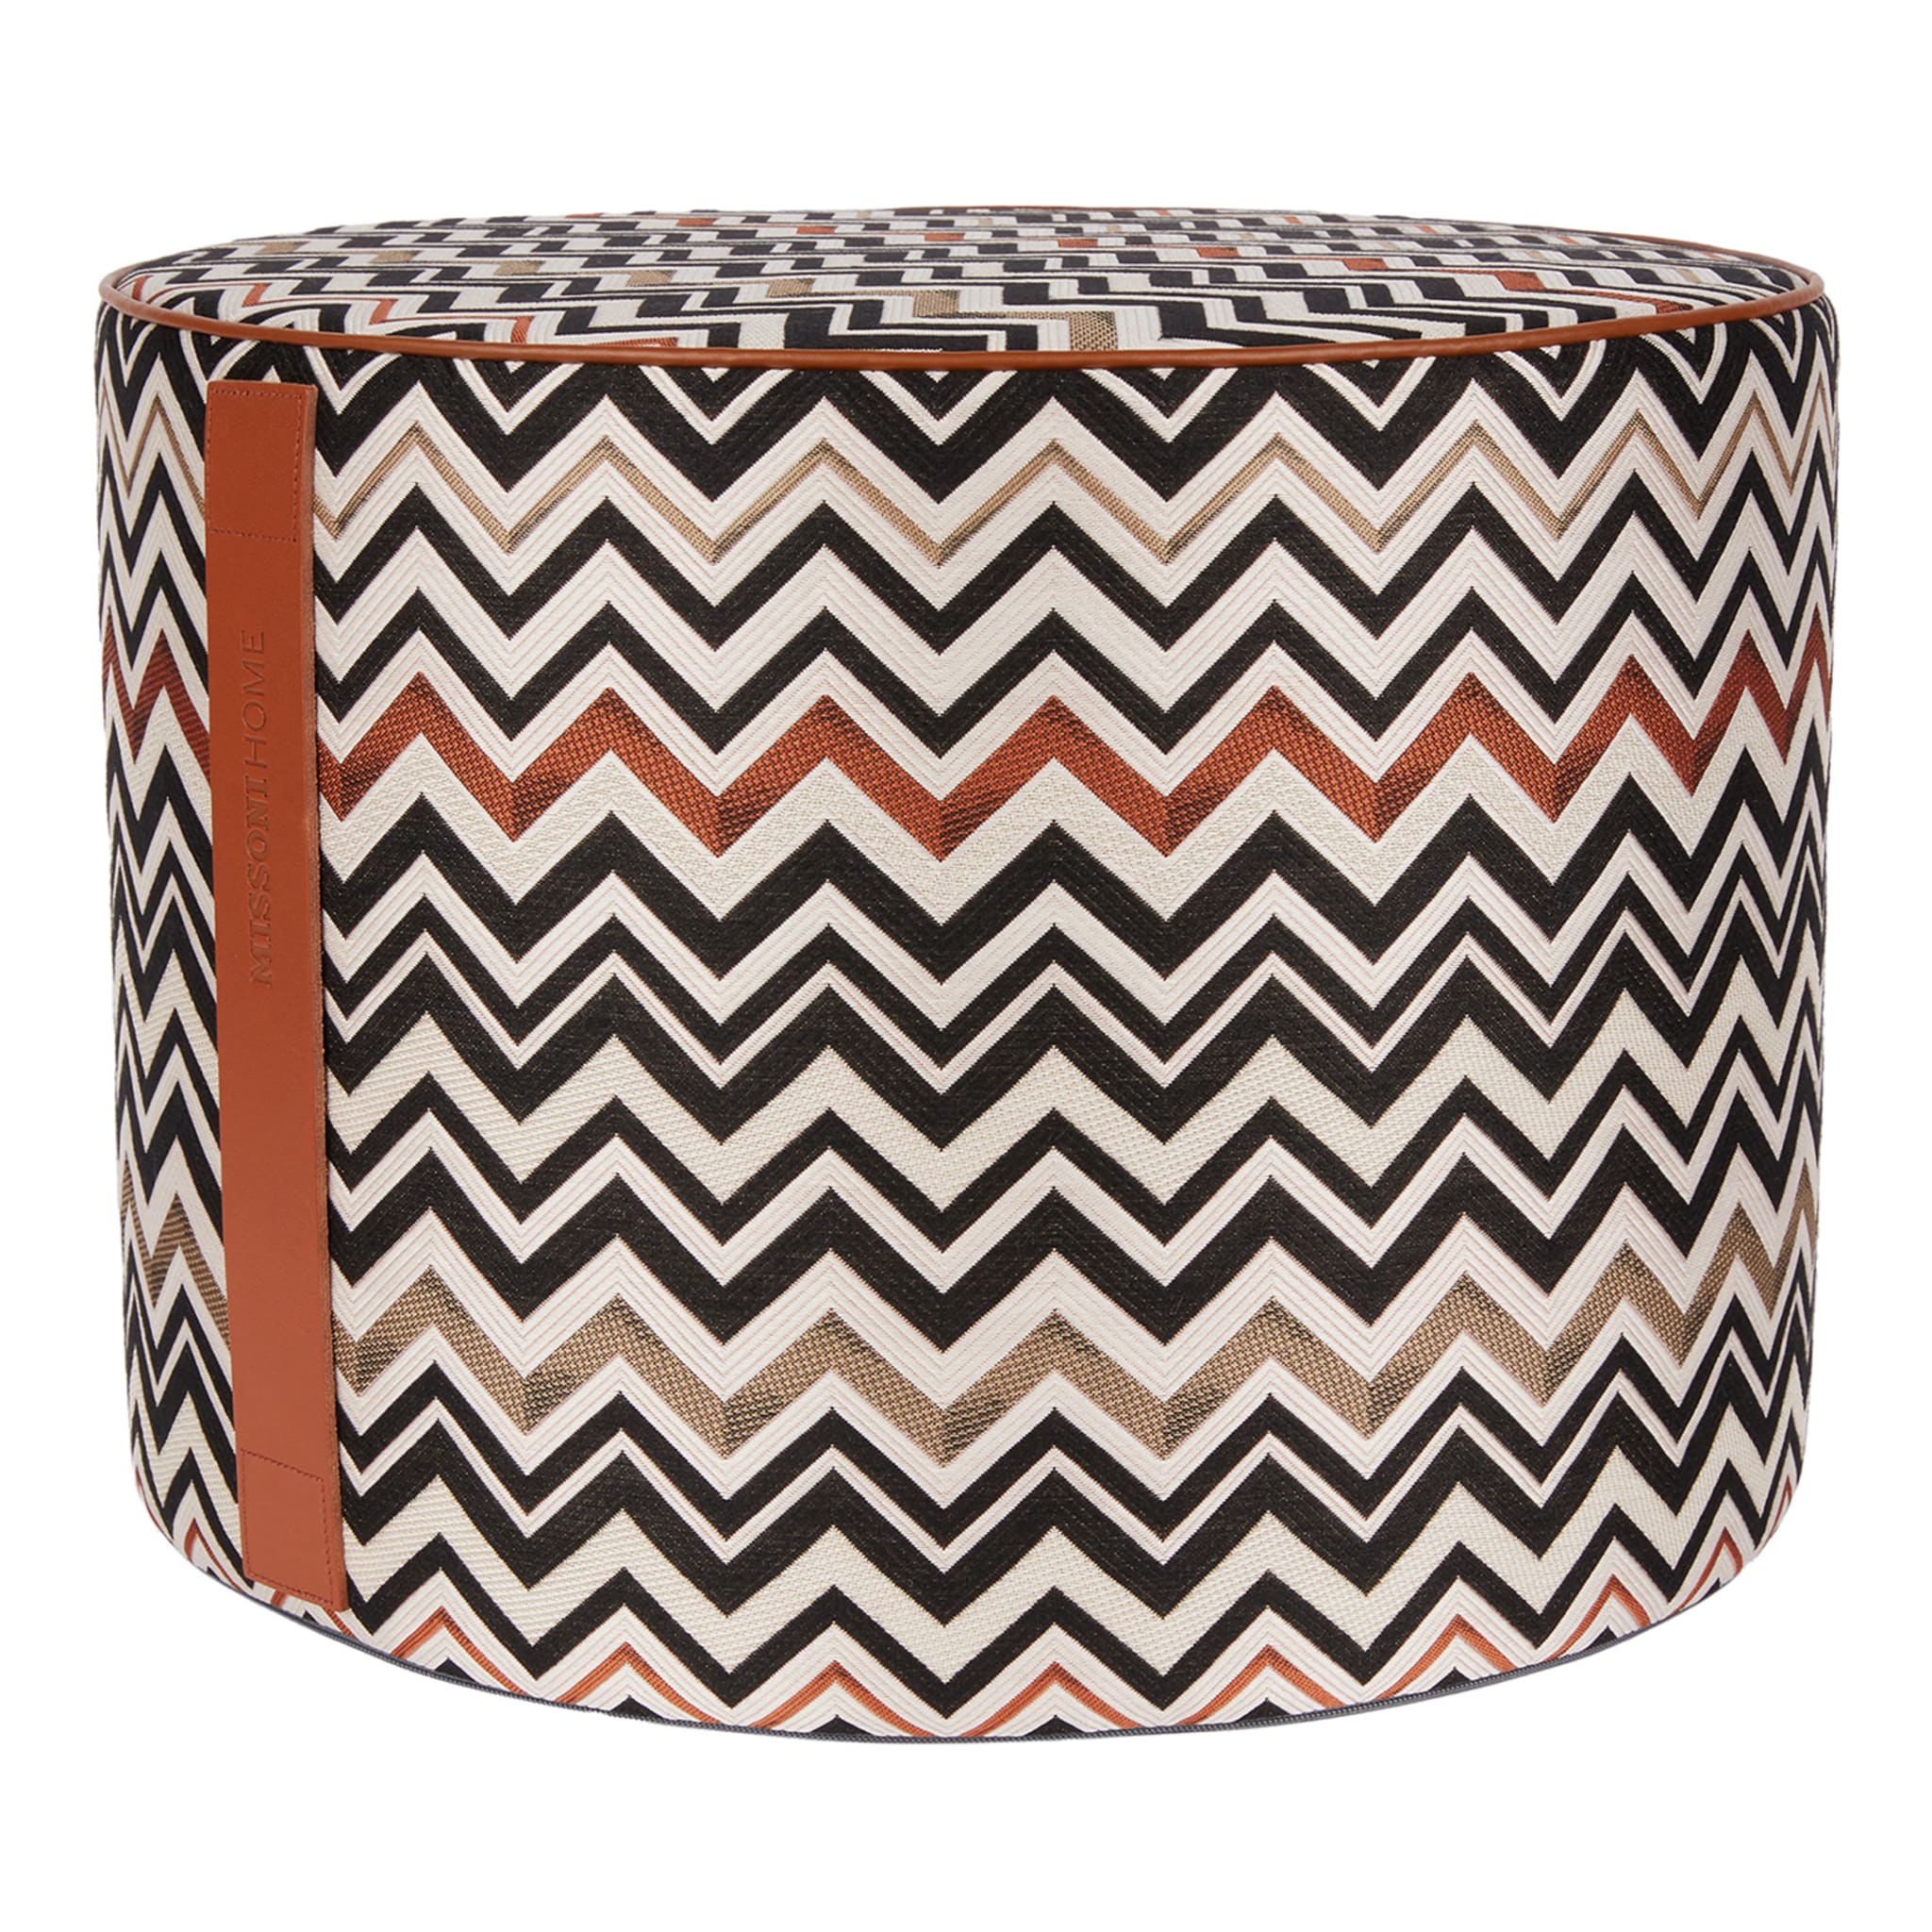 Belfast Cylindrical Pouf #1 - Main view